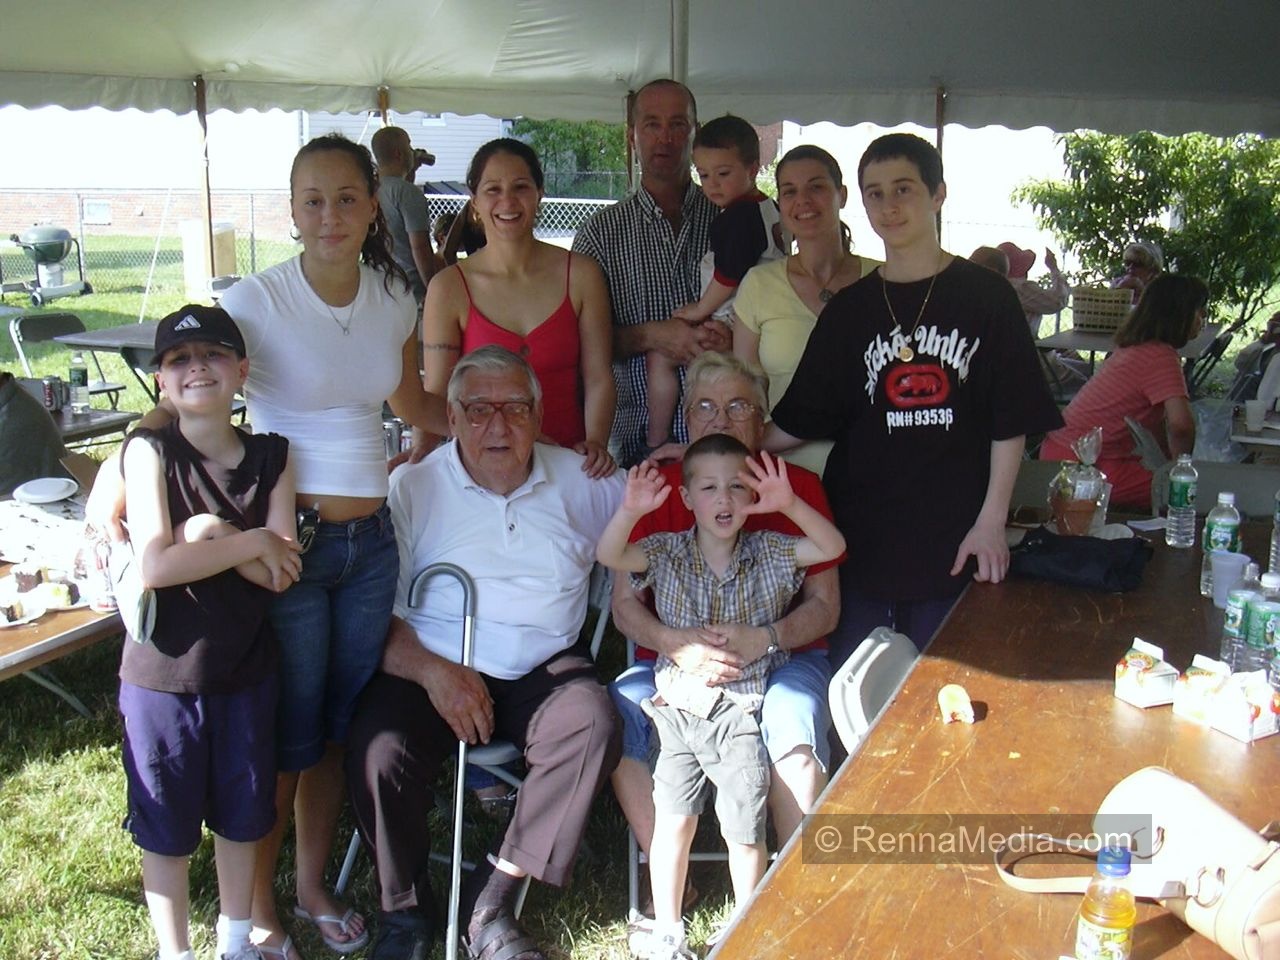 Peterstown Picnic 2005